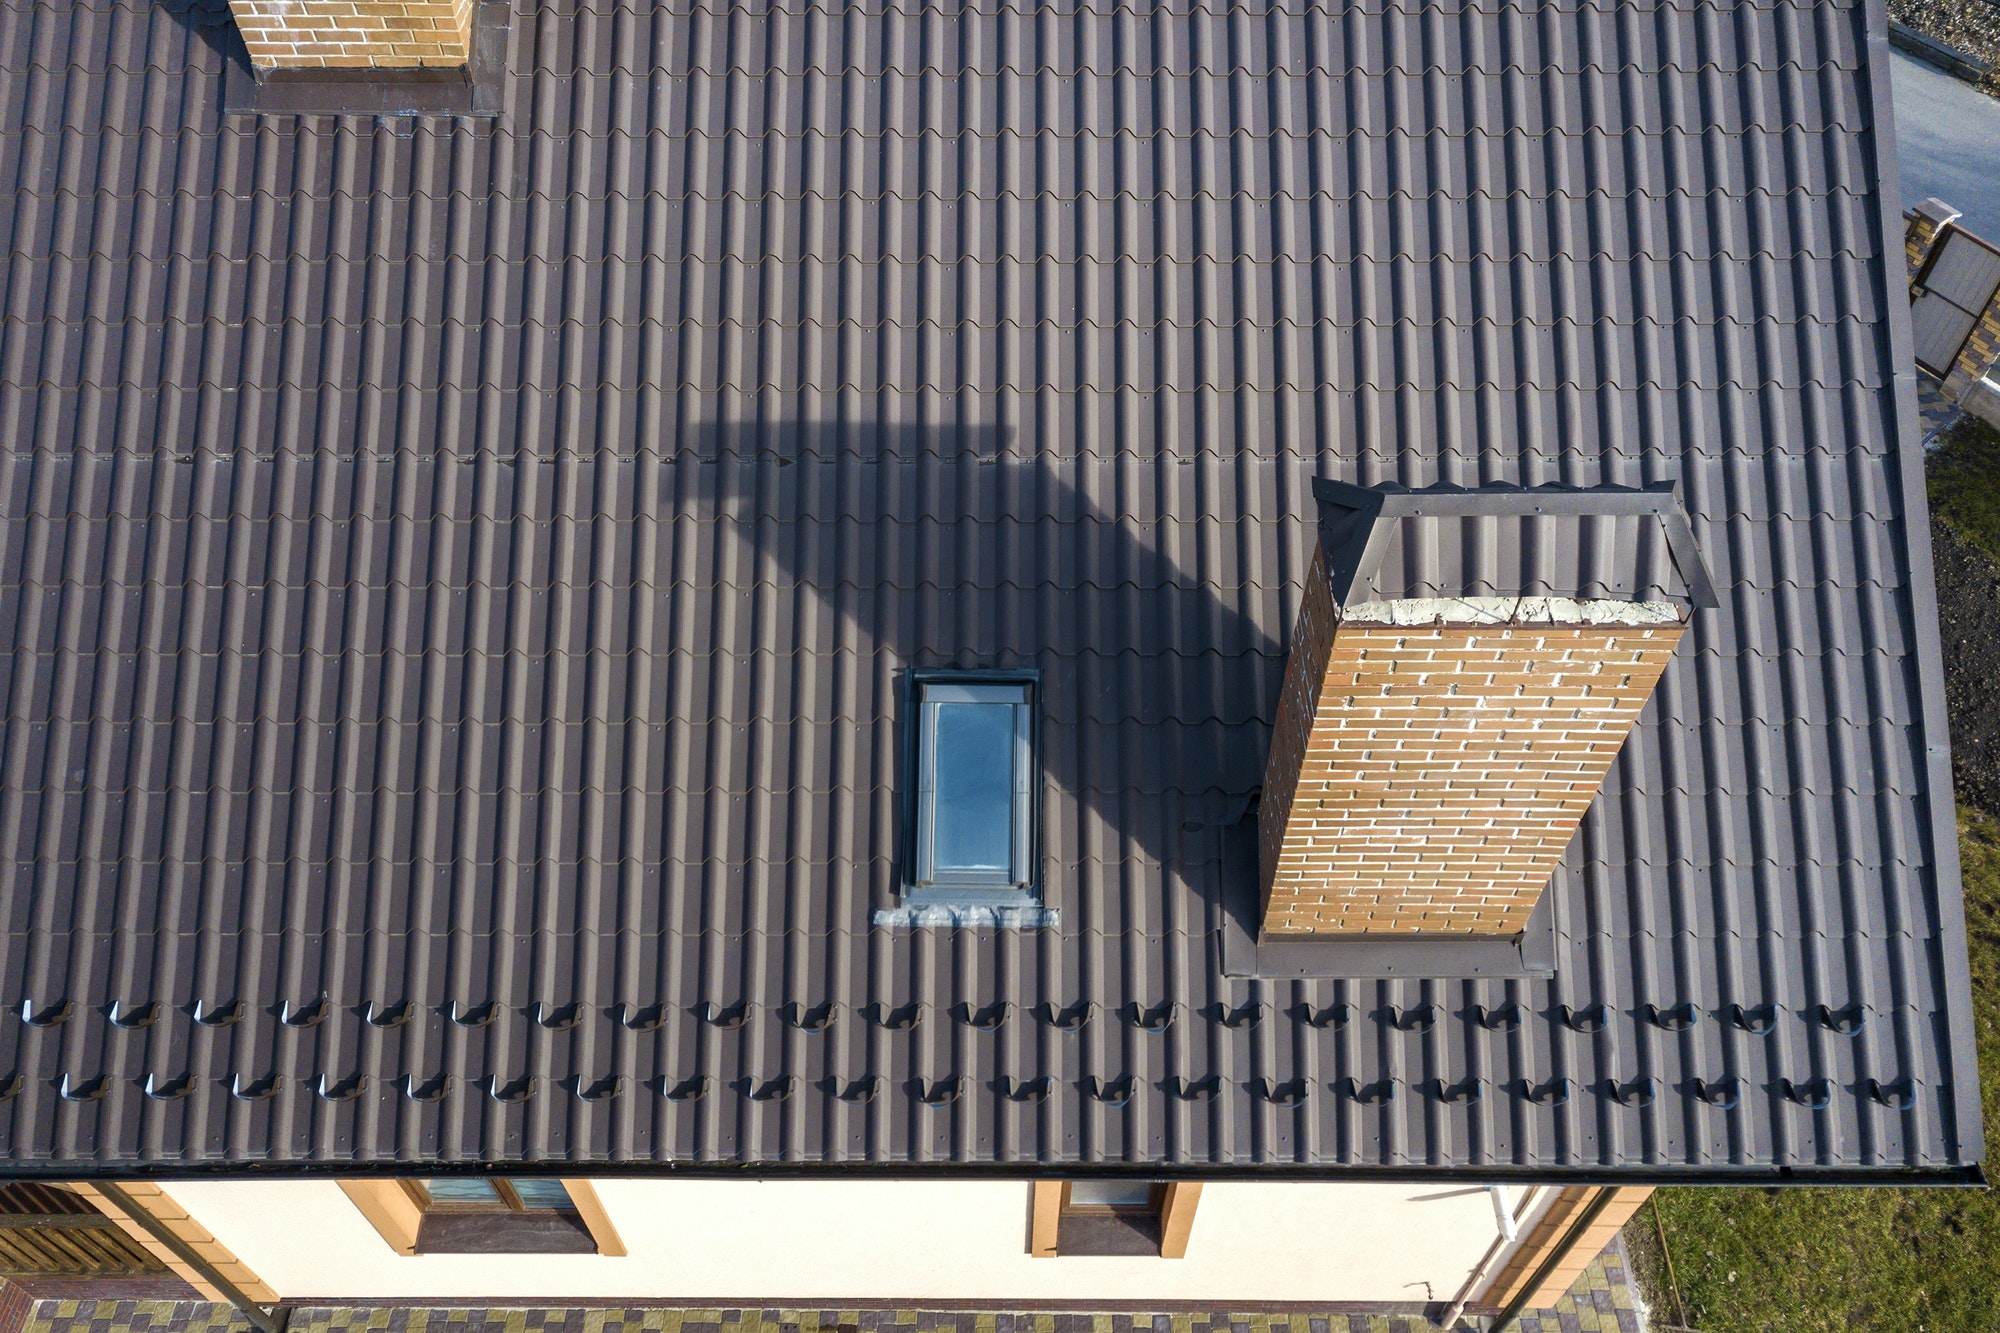 Aerial top view of building steep shingle roof, brick chimneys and small attic window on house top